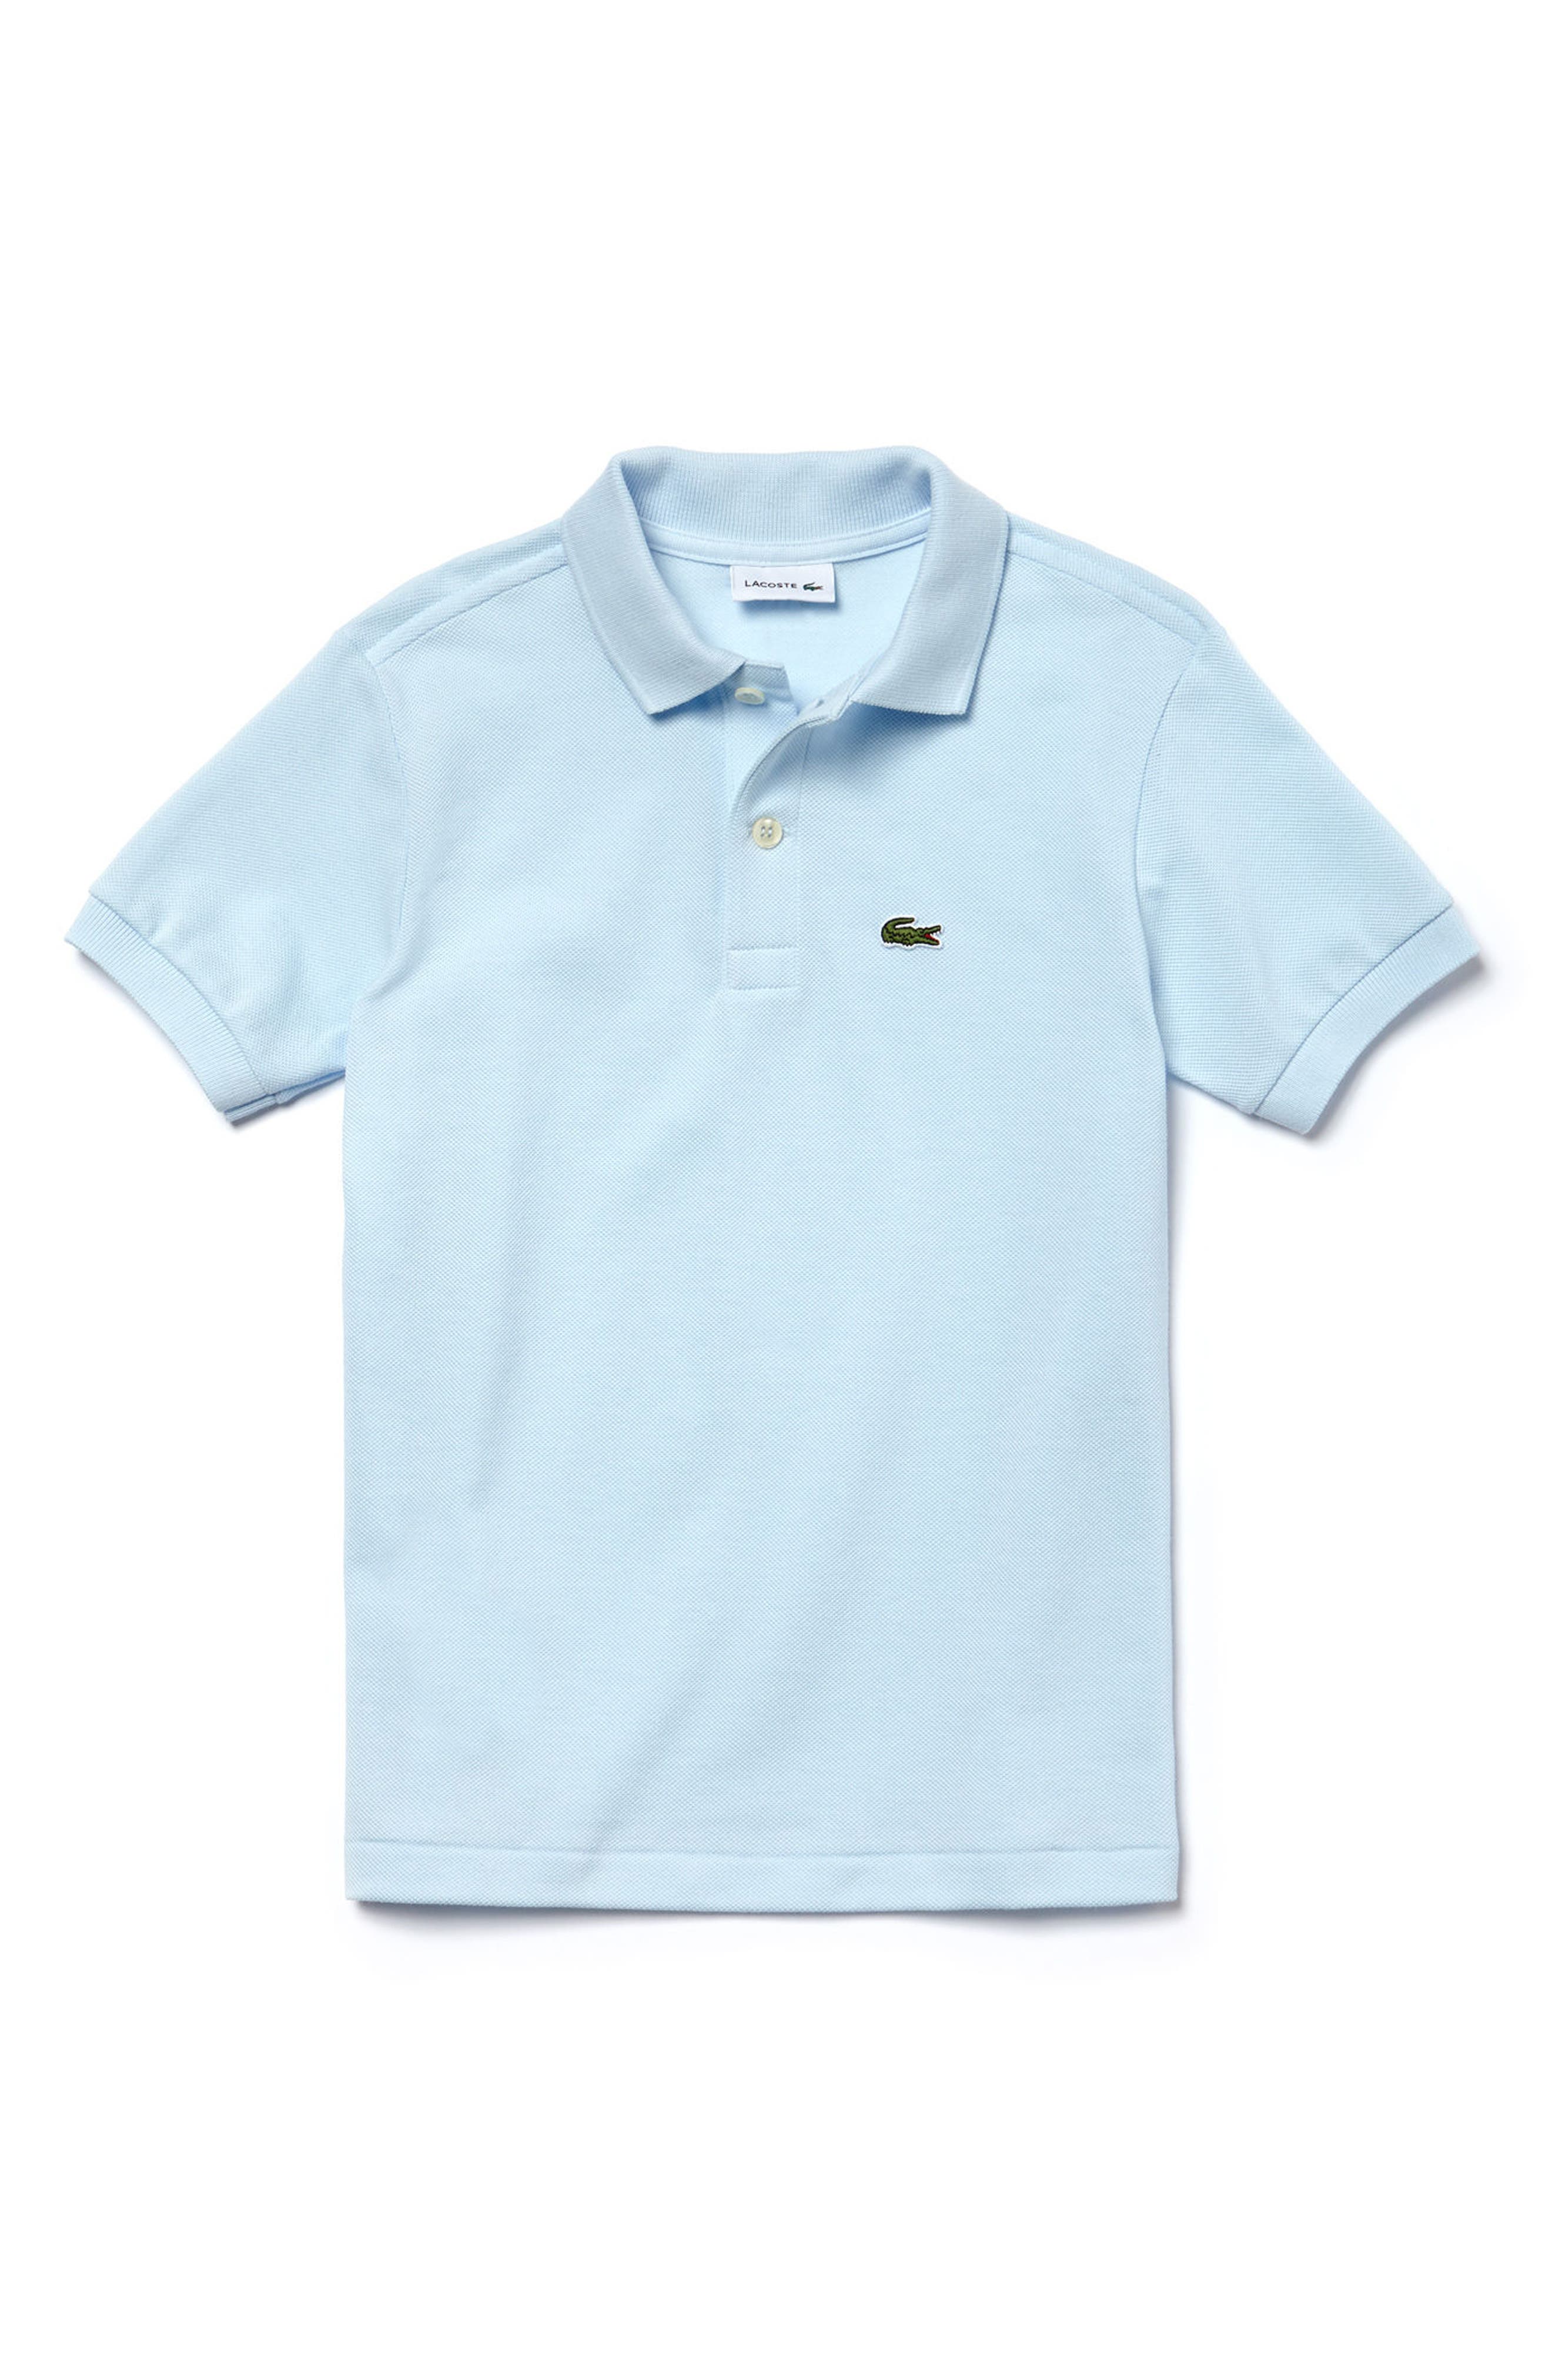 baby blue lacoste shirt